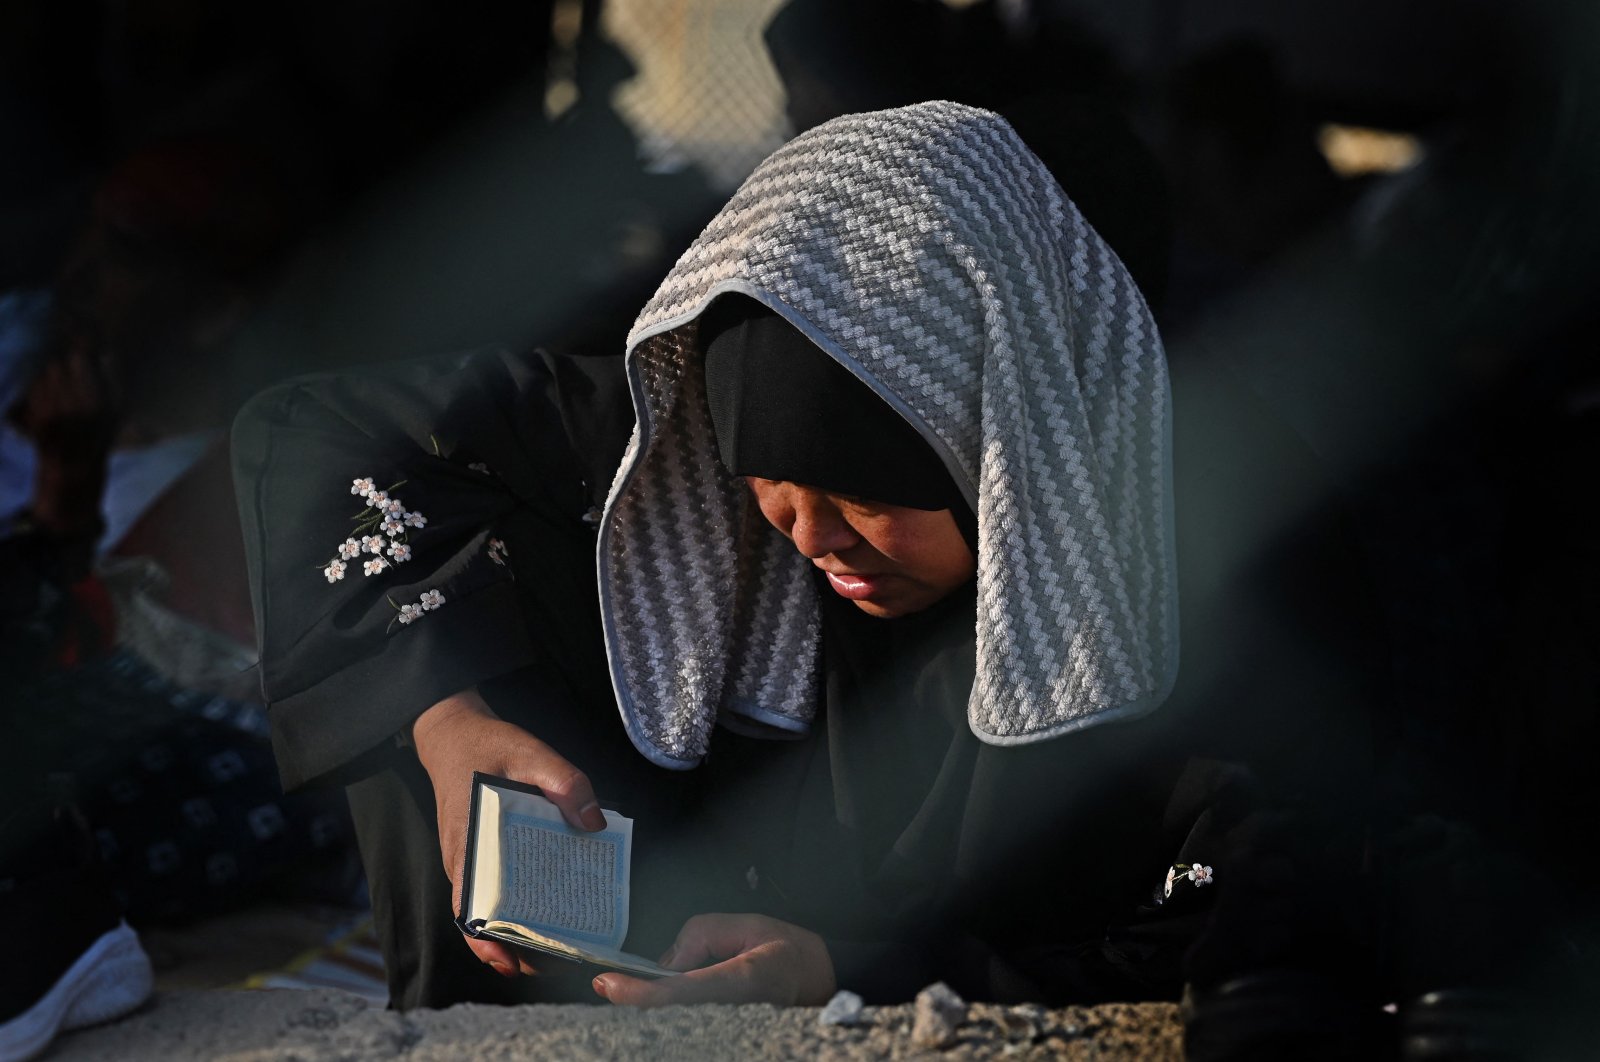 A Muslim pilgrim recites from the Quran during the symbolic stoning of the devil ritual as part of the hajj pilgrimage in Mina, near the holy city of Mecca, Saudi Arabia, June 29, 2023. (AFP Photo)